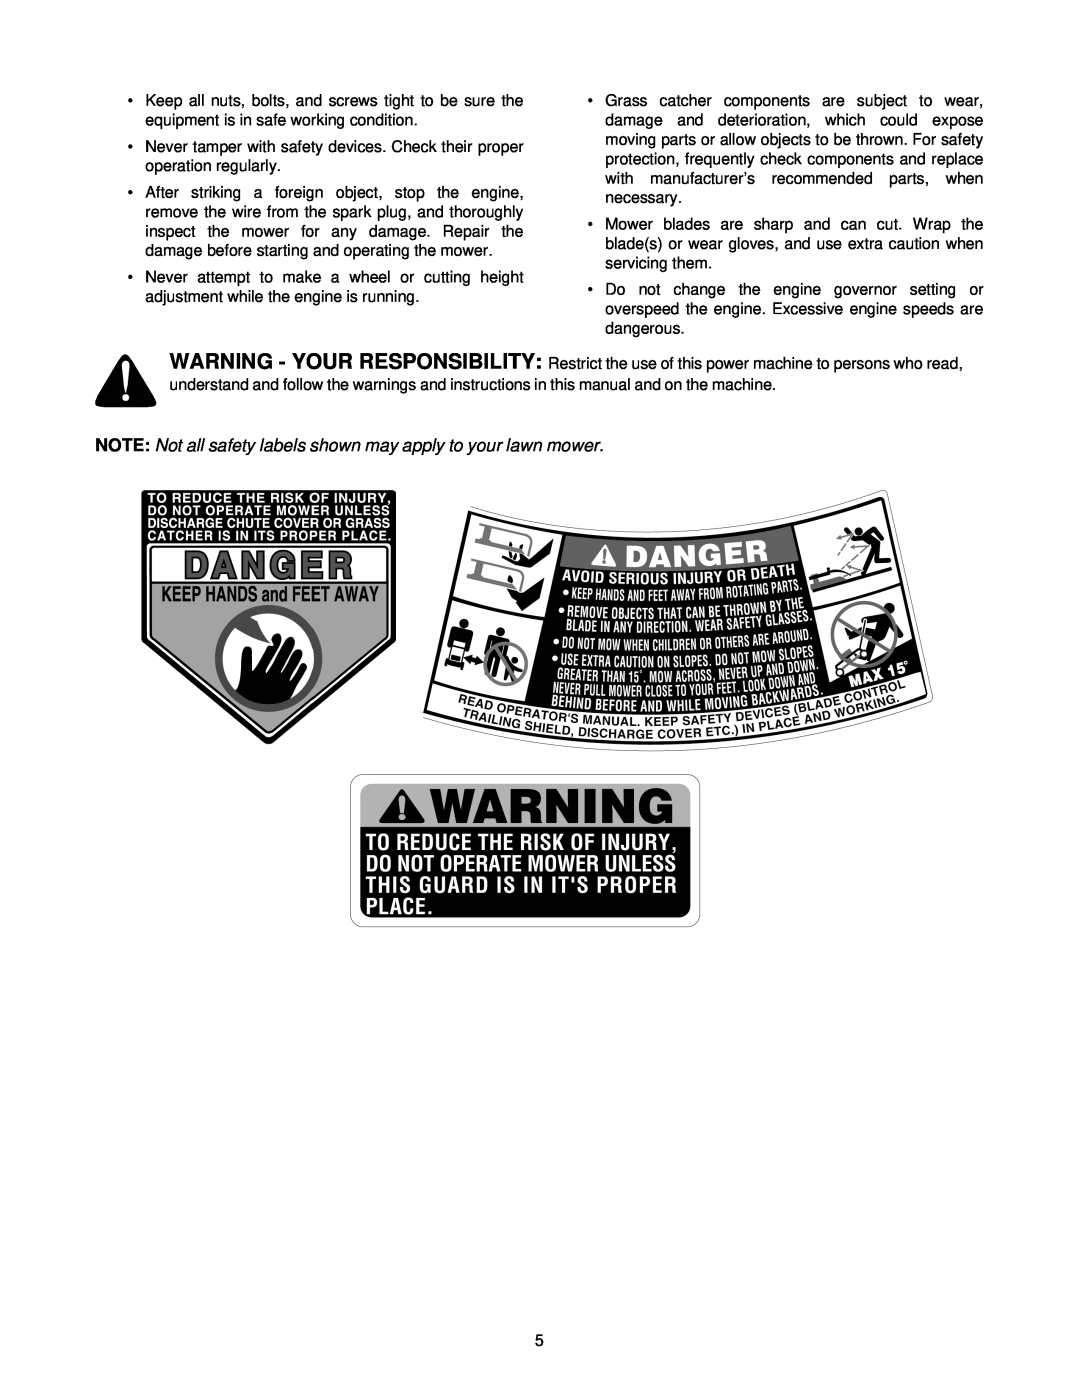 Yard Machines 509 manual NOTE Not all safety labels shown may apply to your lawn mower 